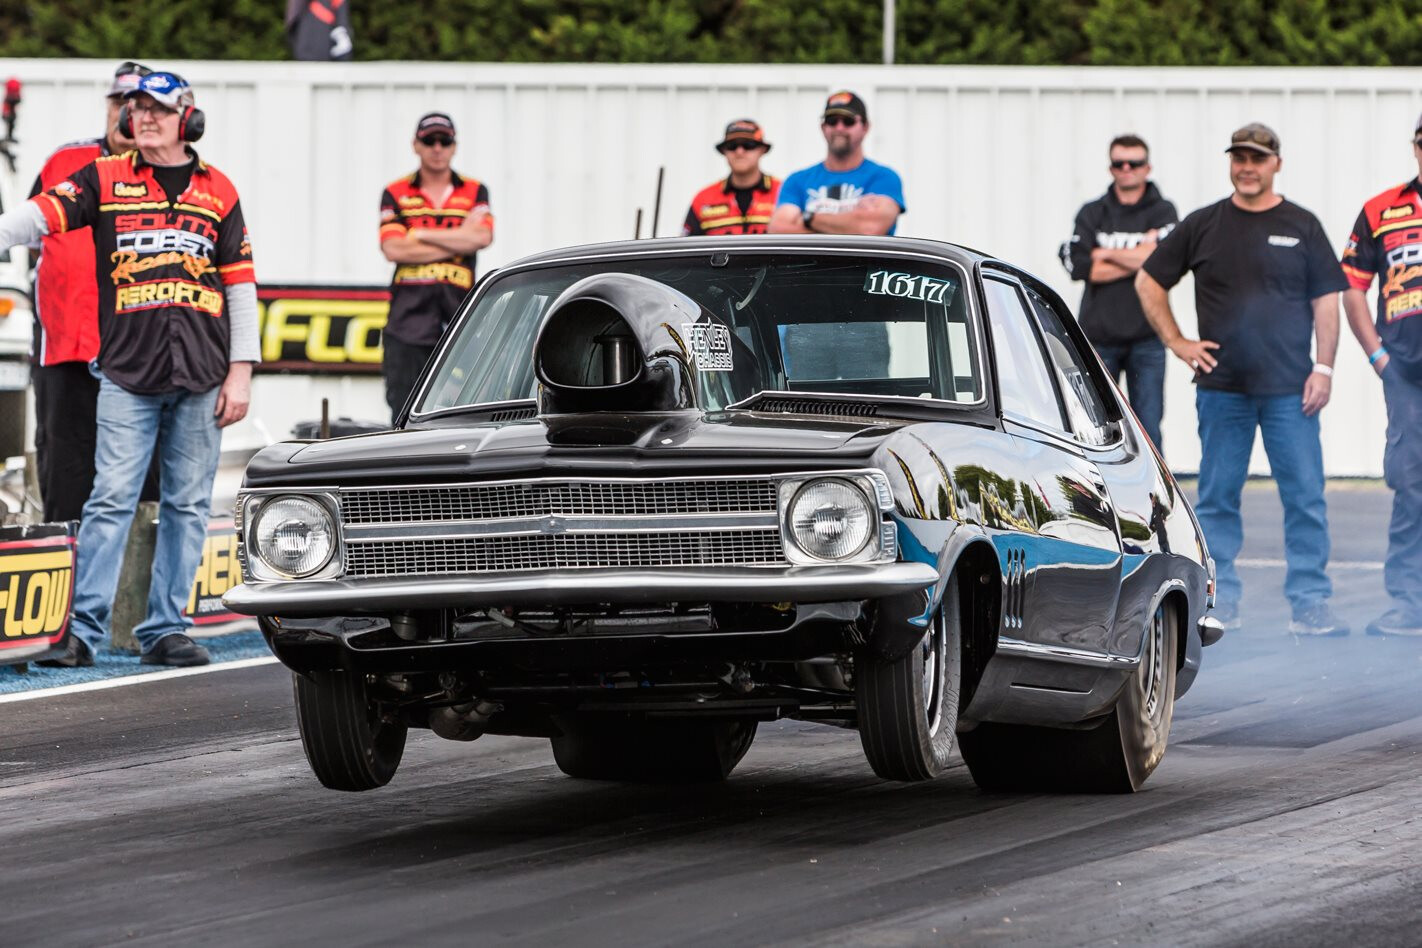 DRAGSTERS, PRO STREETERS AND STREET CARS AT PORTLAND